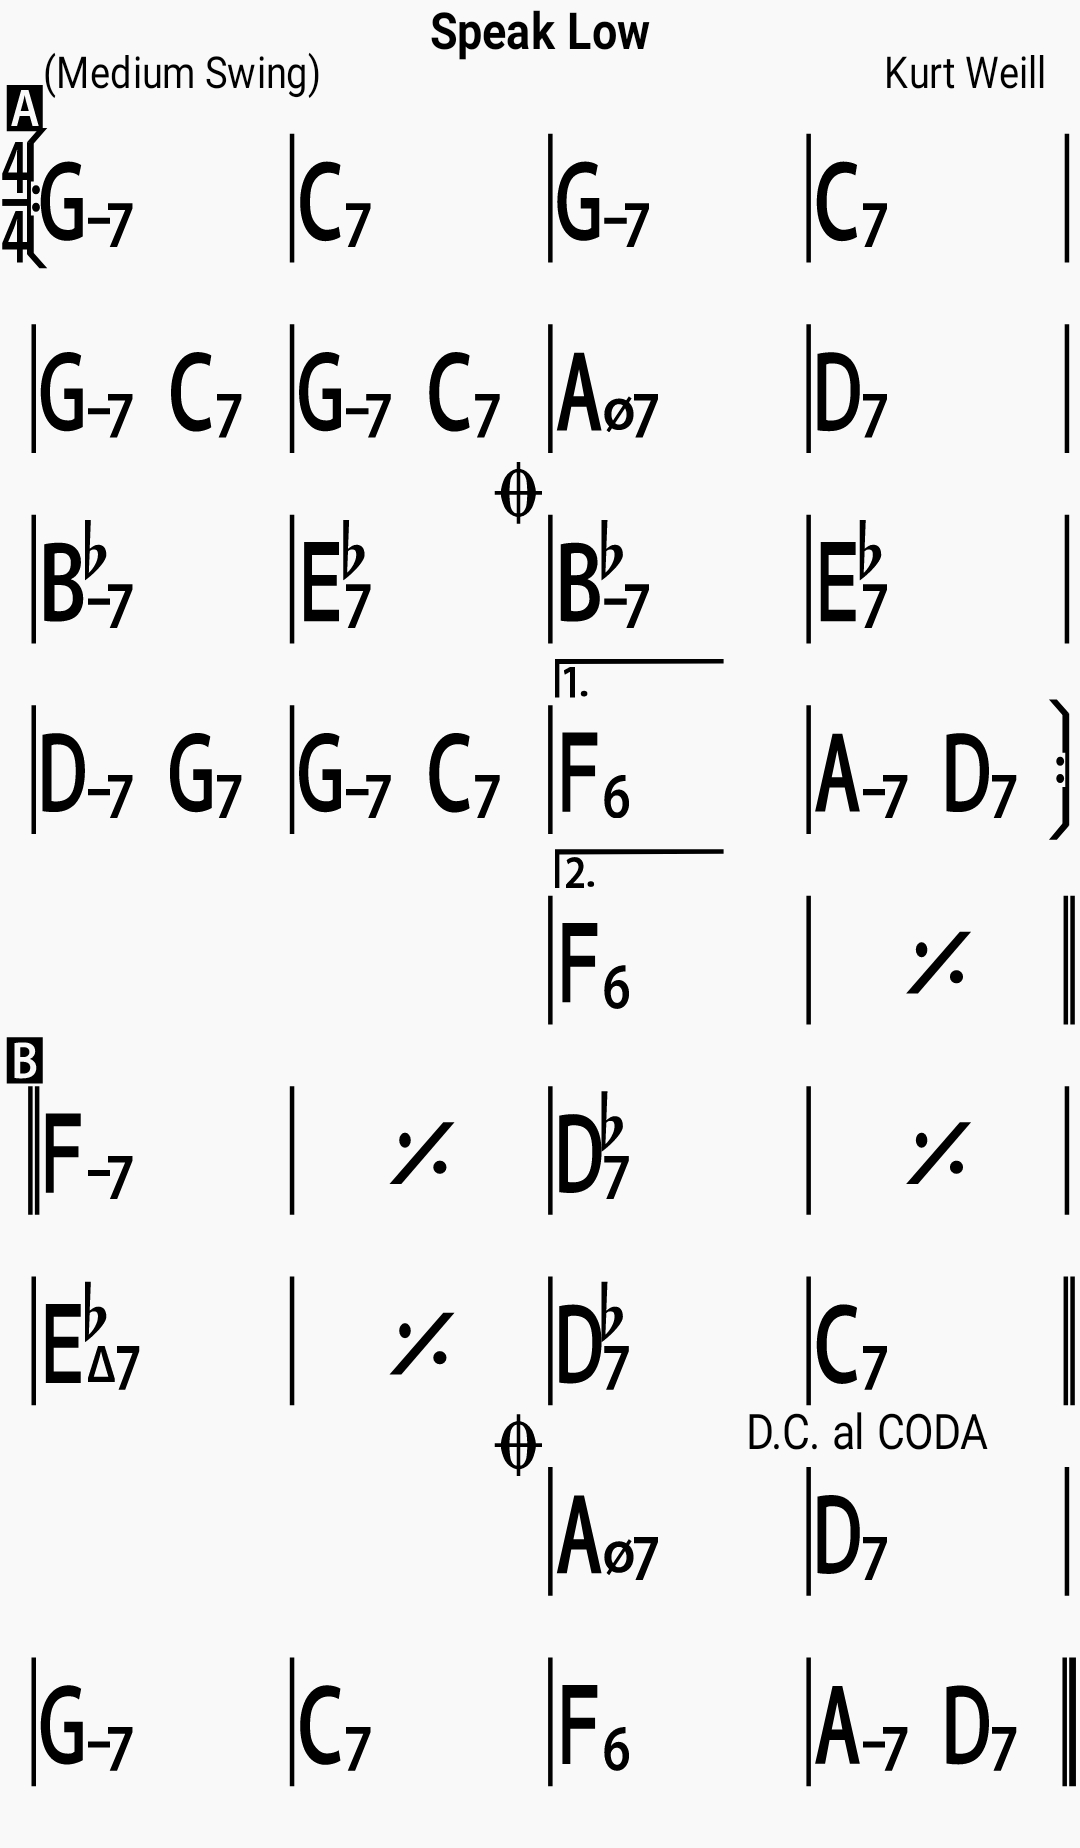 Chord chart for the jazz standard Speak Low